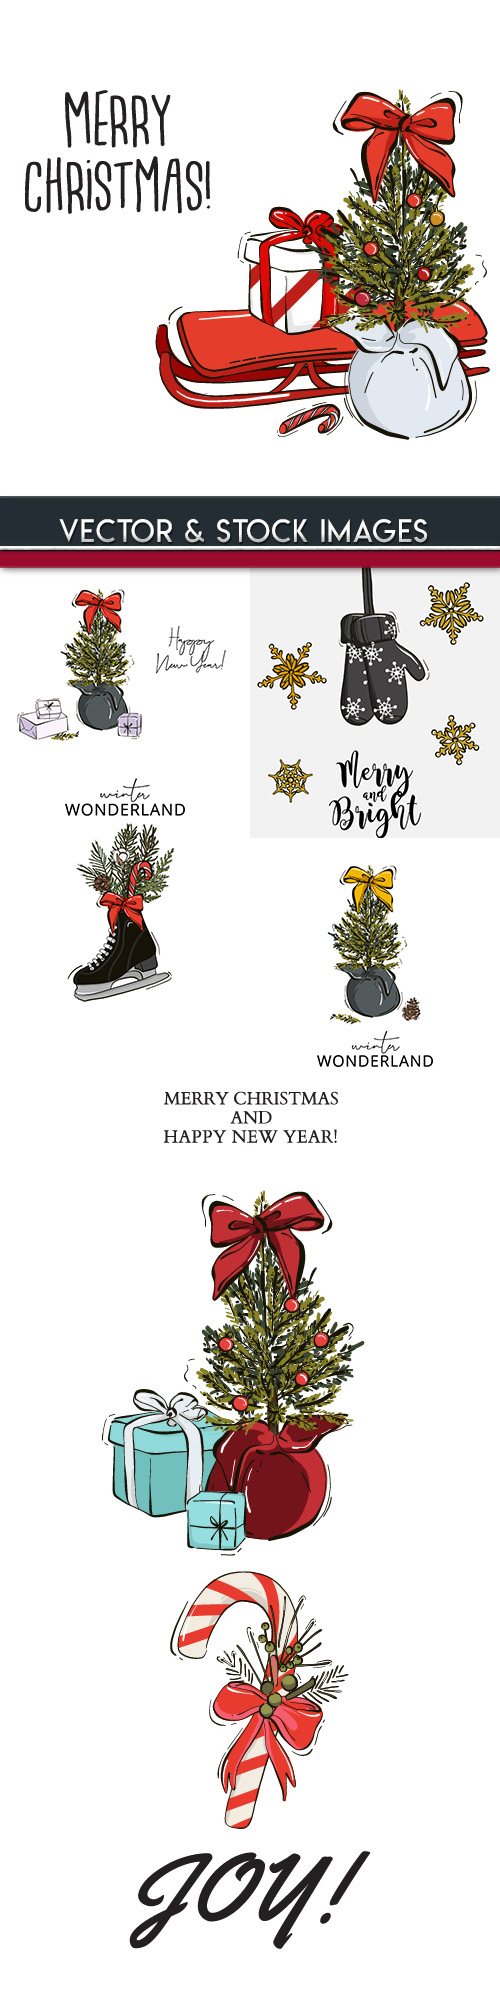 Merry Christmas and New Year background decorative 13